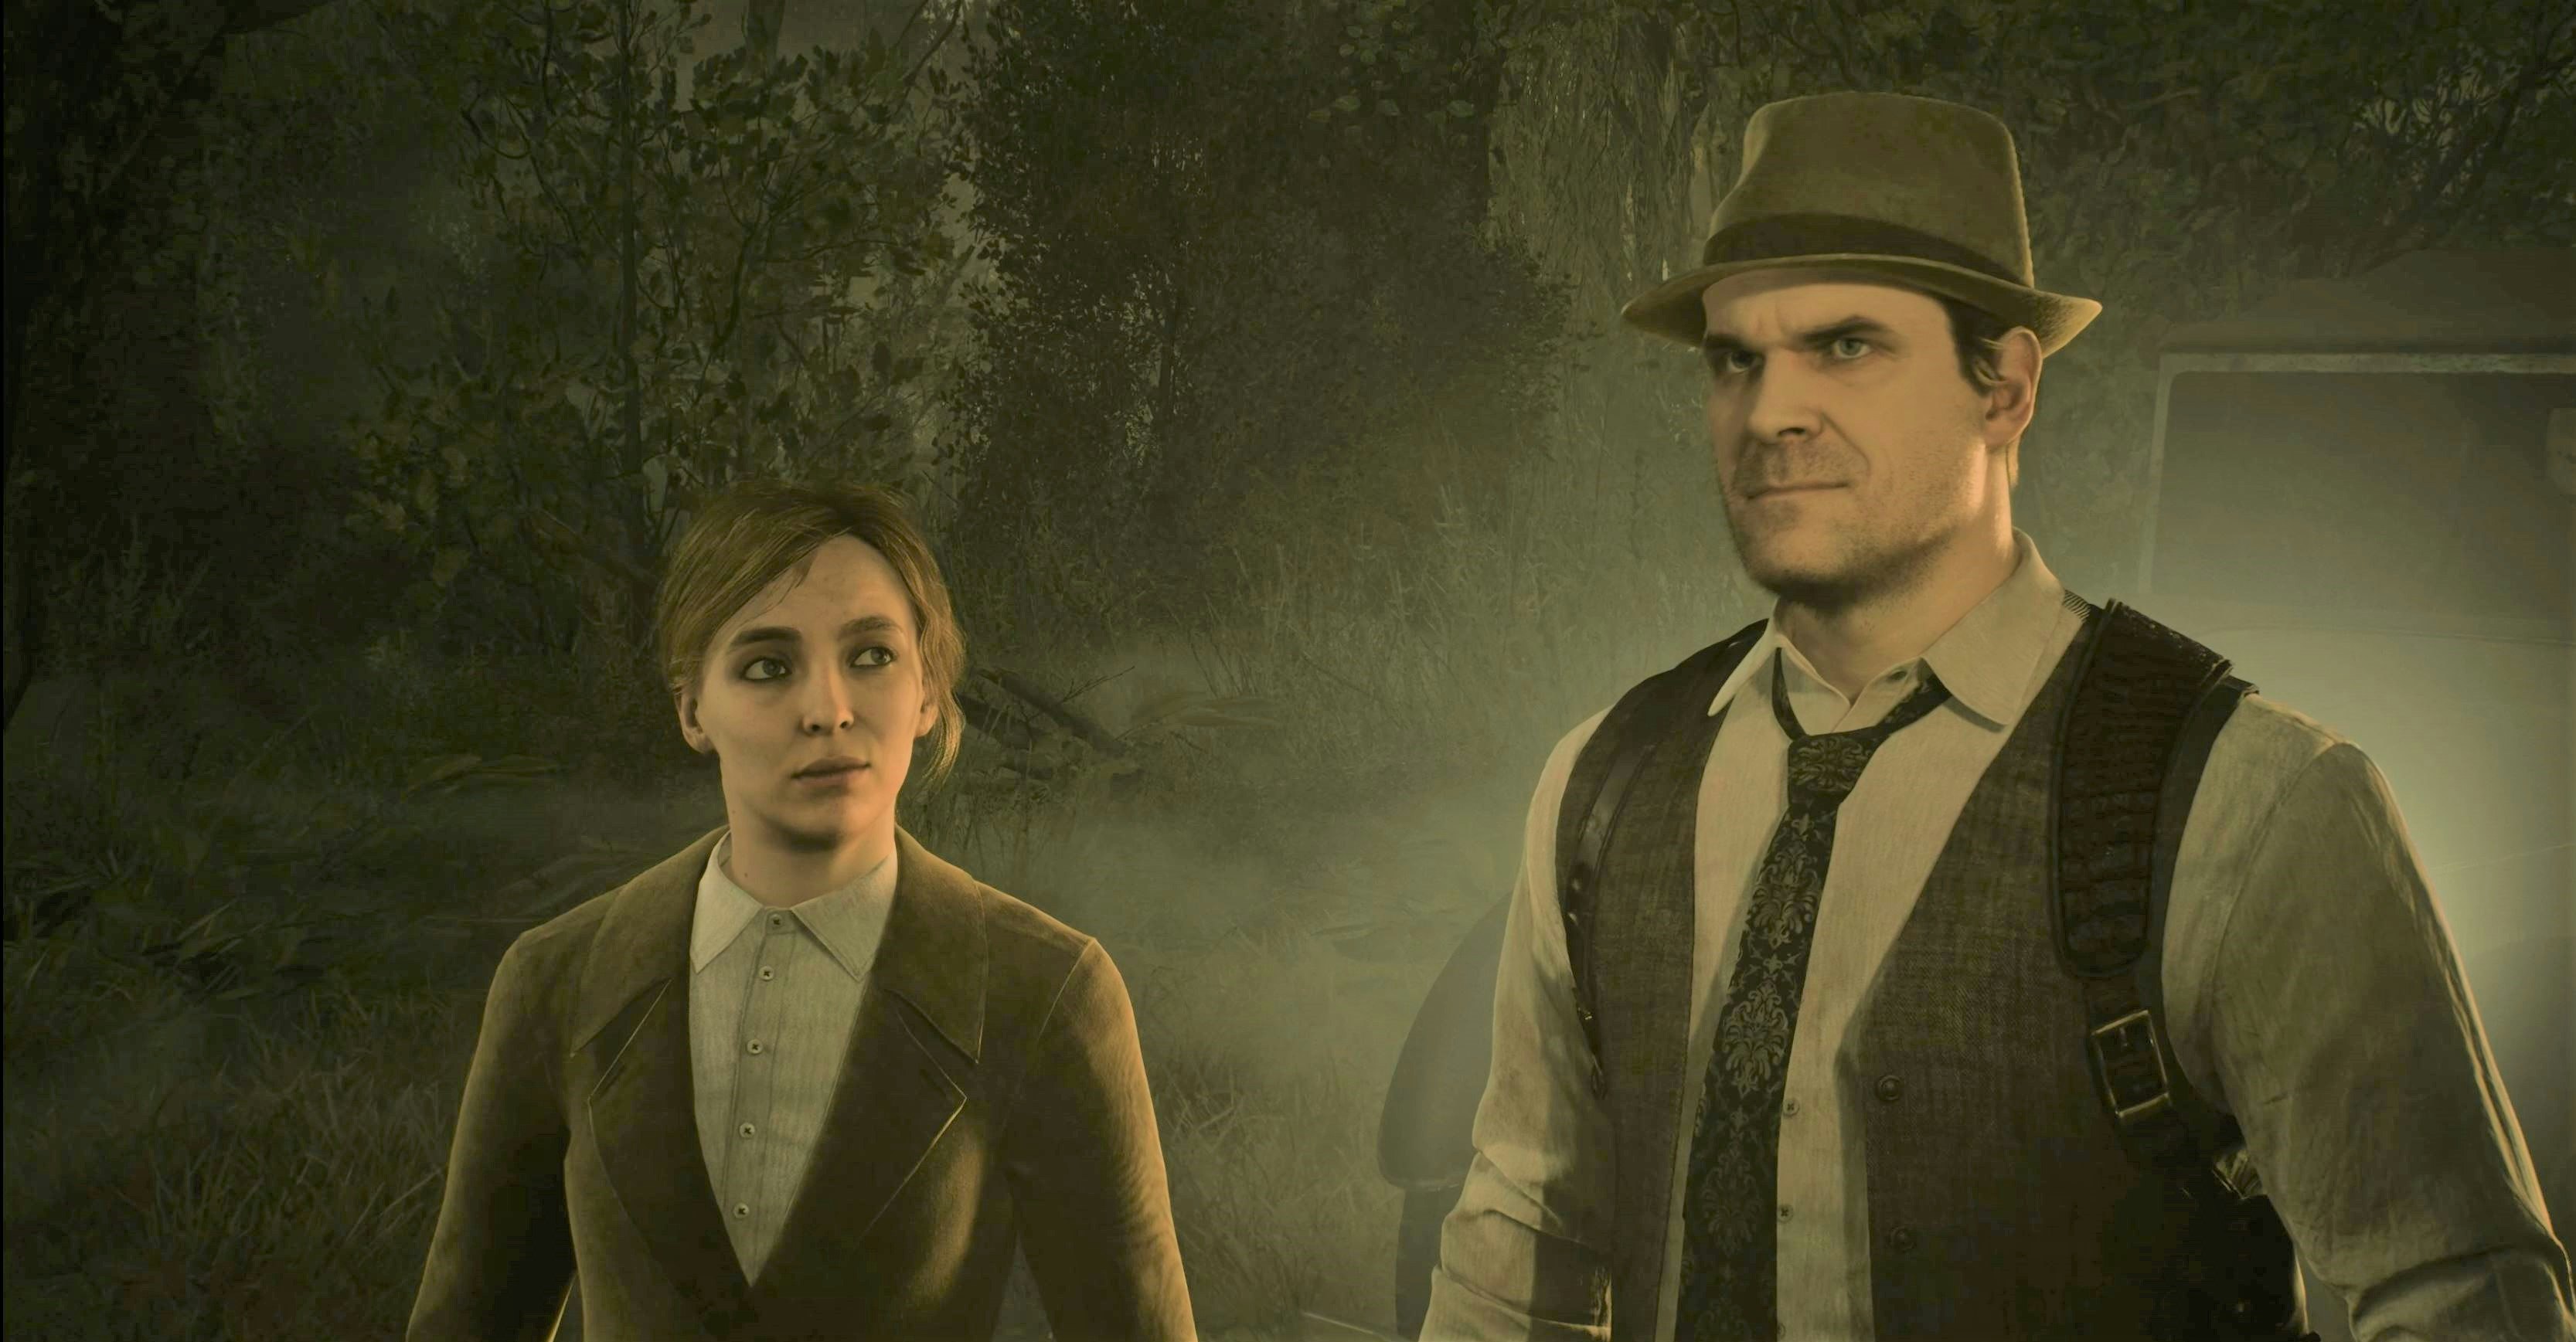 Alone in the Dark: Jodie Comer and David Harbour to lead 2023 video game  remake